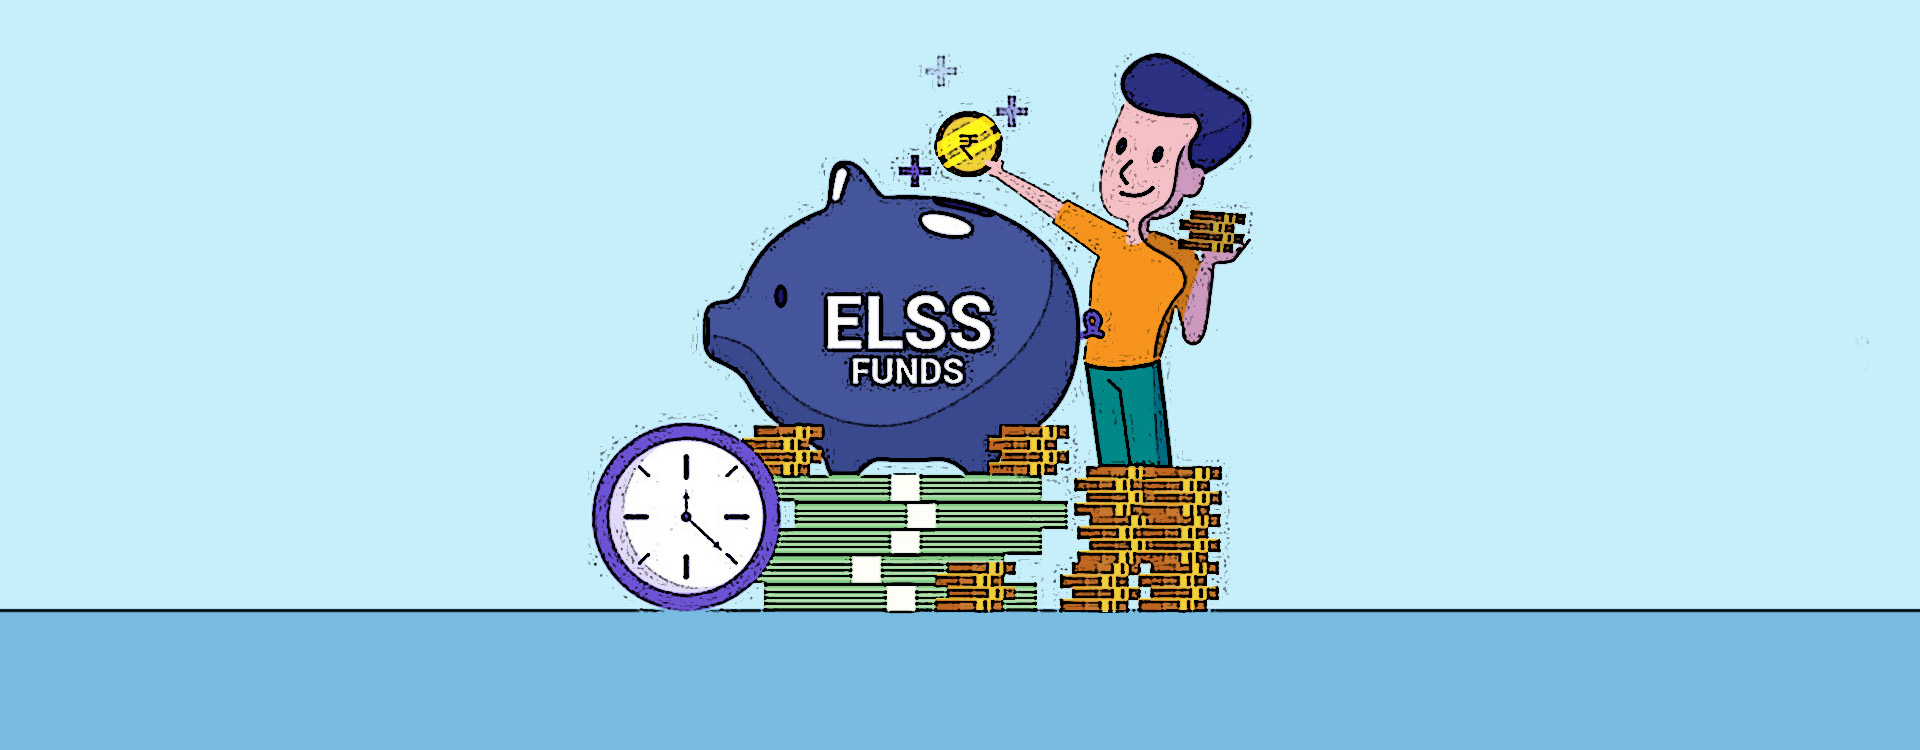 ELSS Fund Scheme: Is It Really A Top Tax Saver? | Dutch Uncles